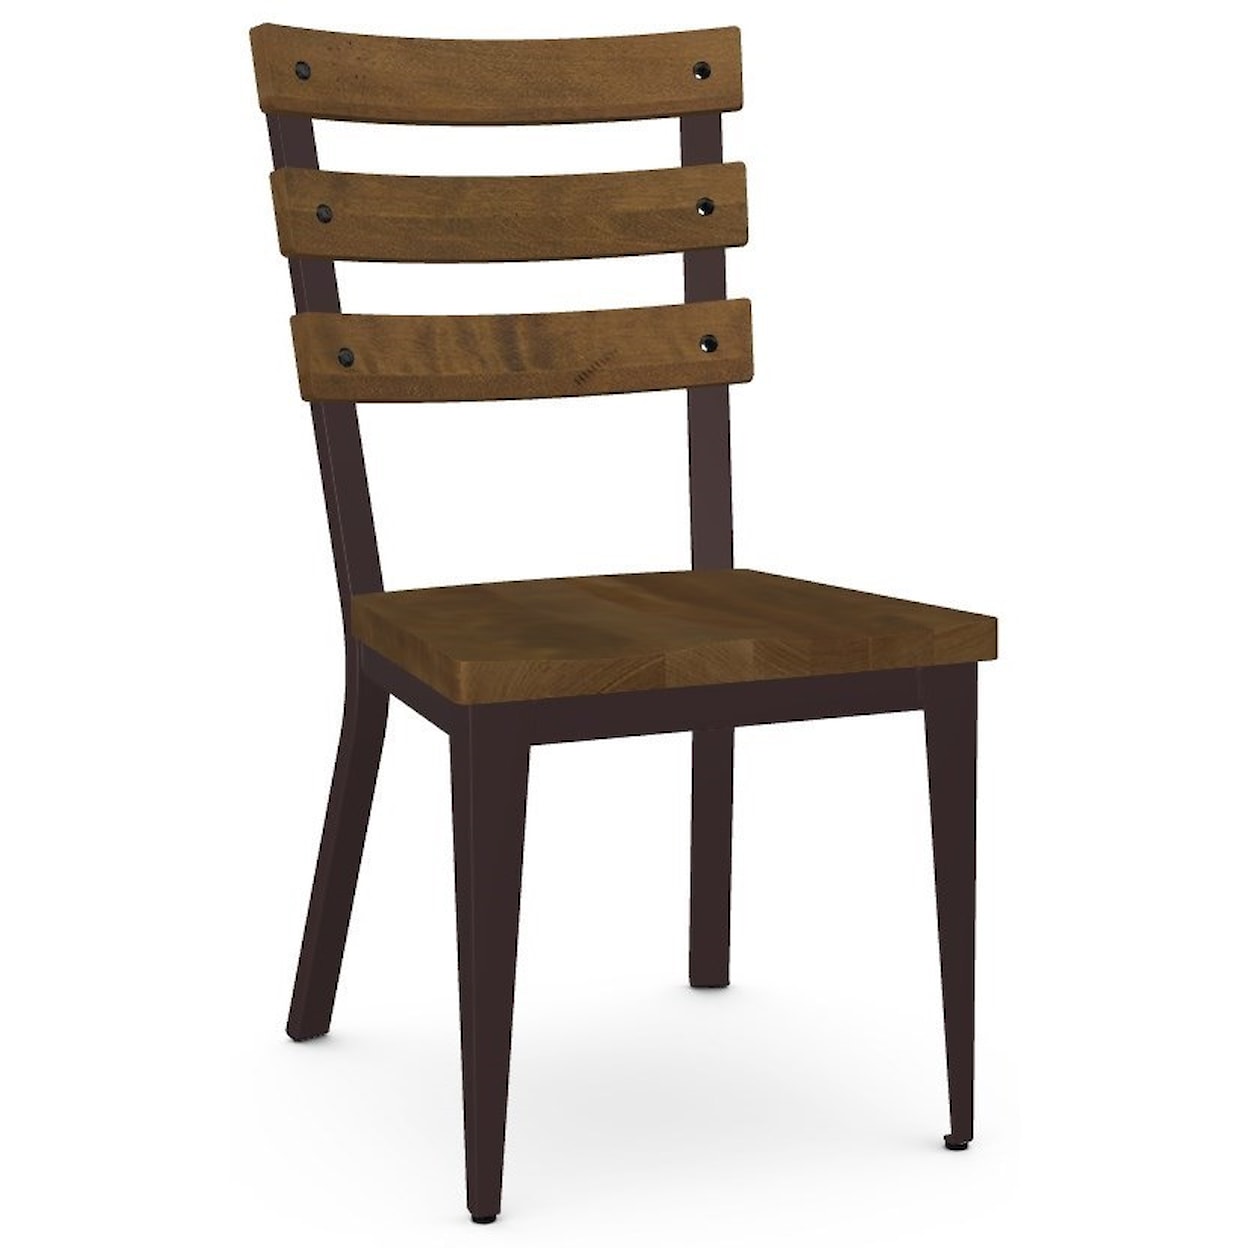 Amisco Industrial Dexter Side Chair 